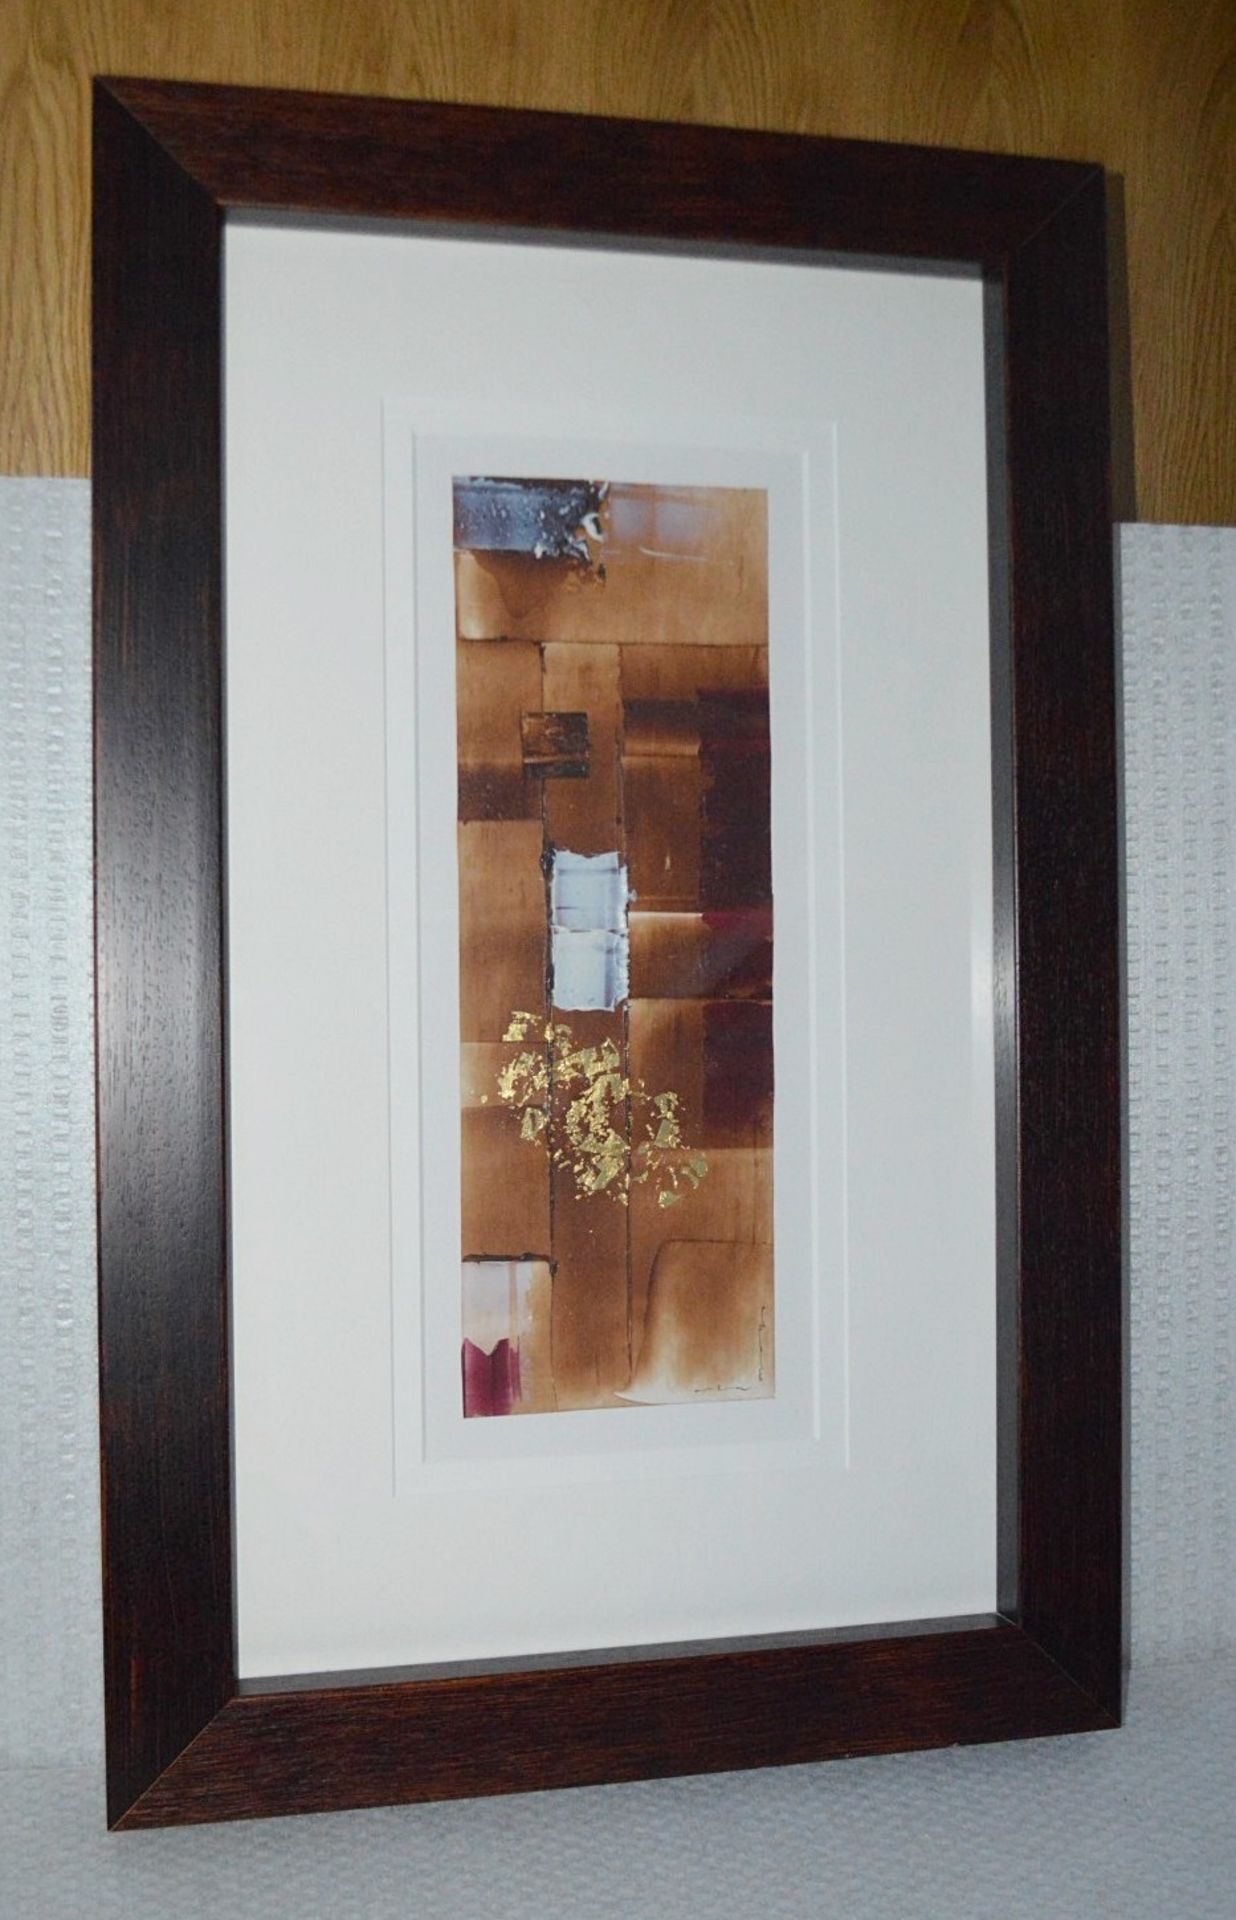 1 x Framed Original Mixed Media Oblong-Shaped Artwork By Orla May In Brown & Gold